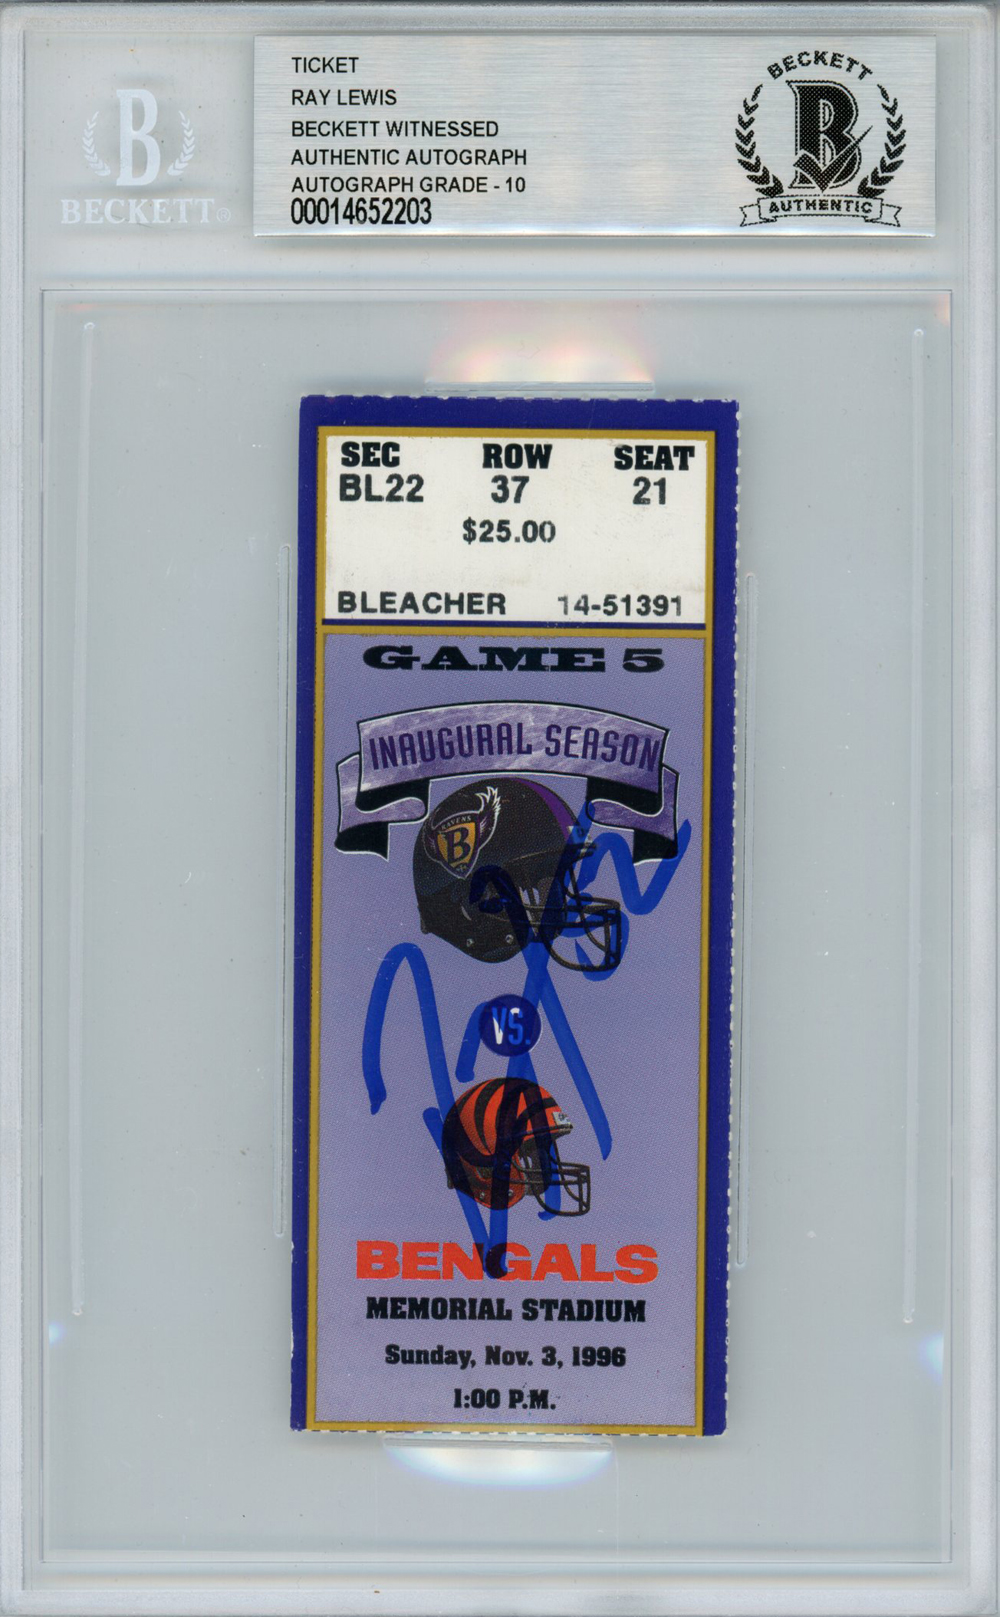 Ray Lewis Autographed/Signed 11/3/1996 vs Bengals Ticket Beckett Slab